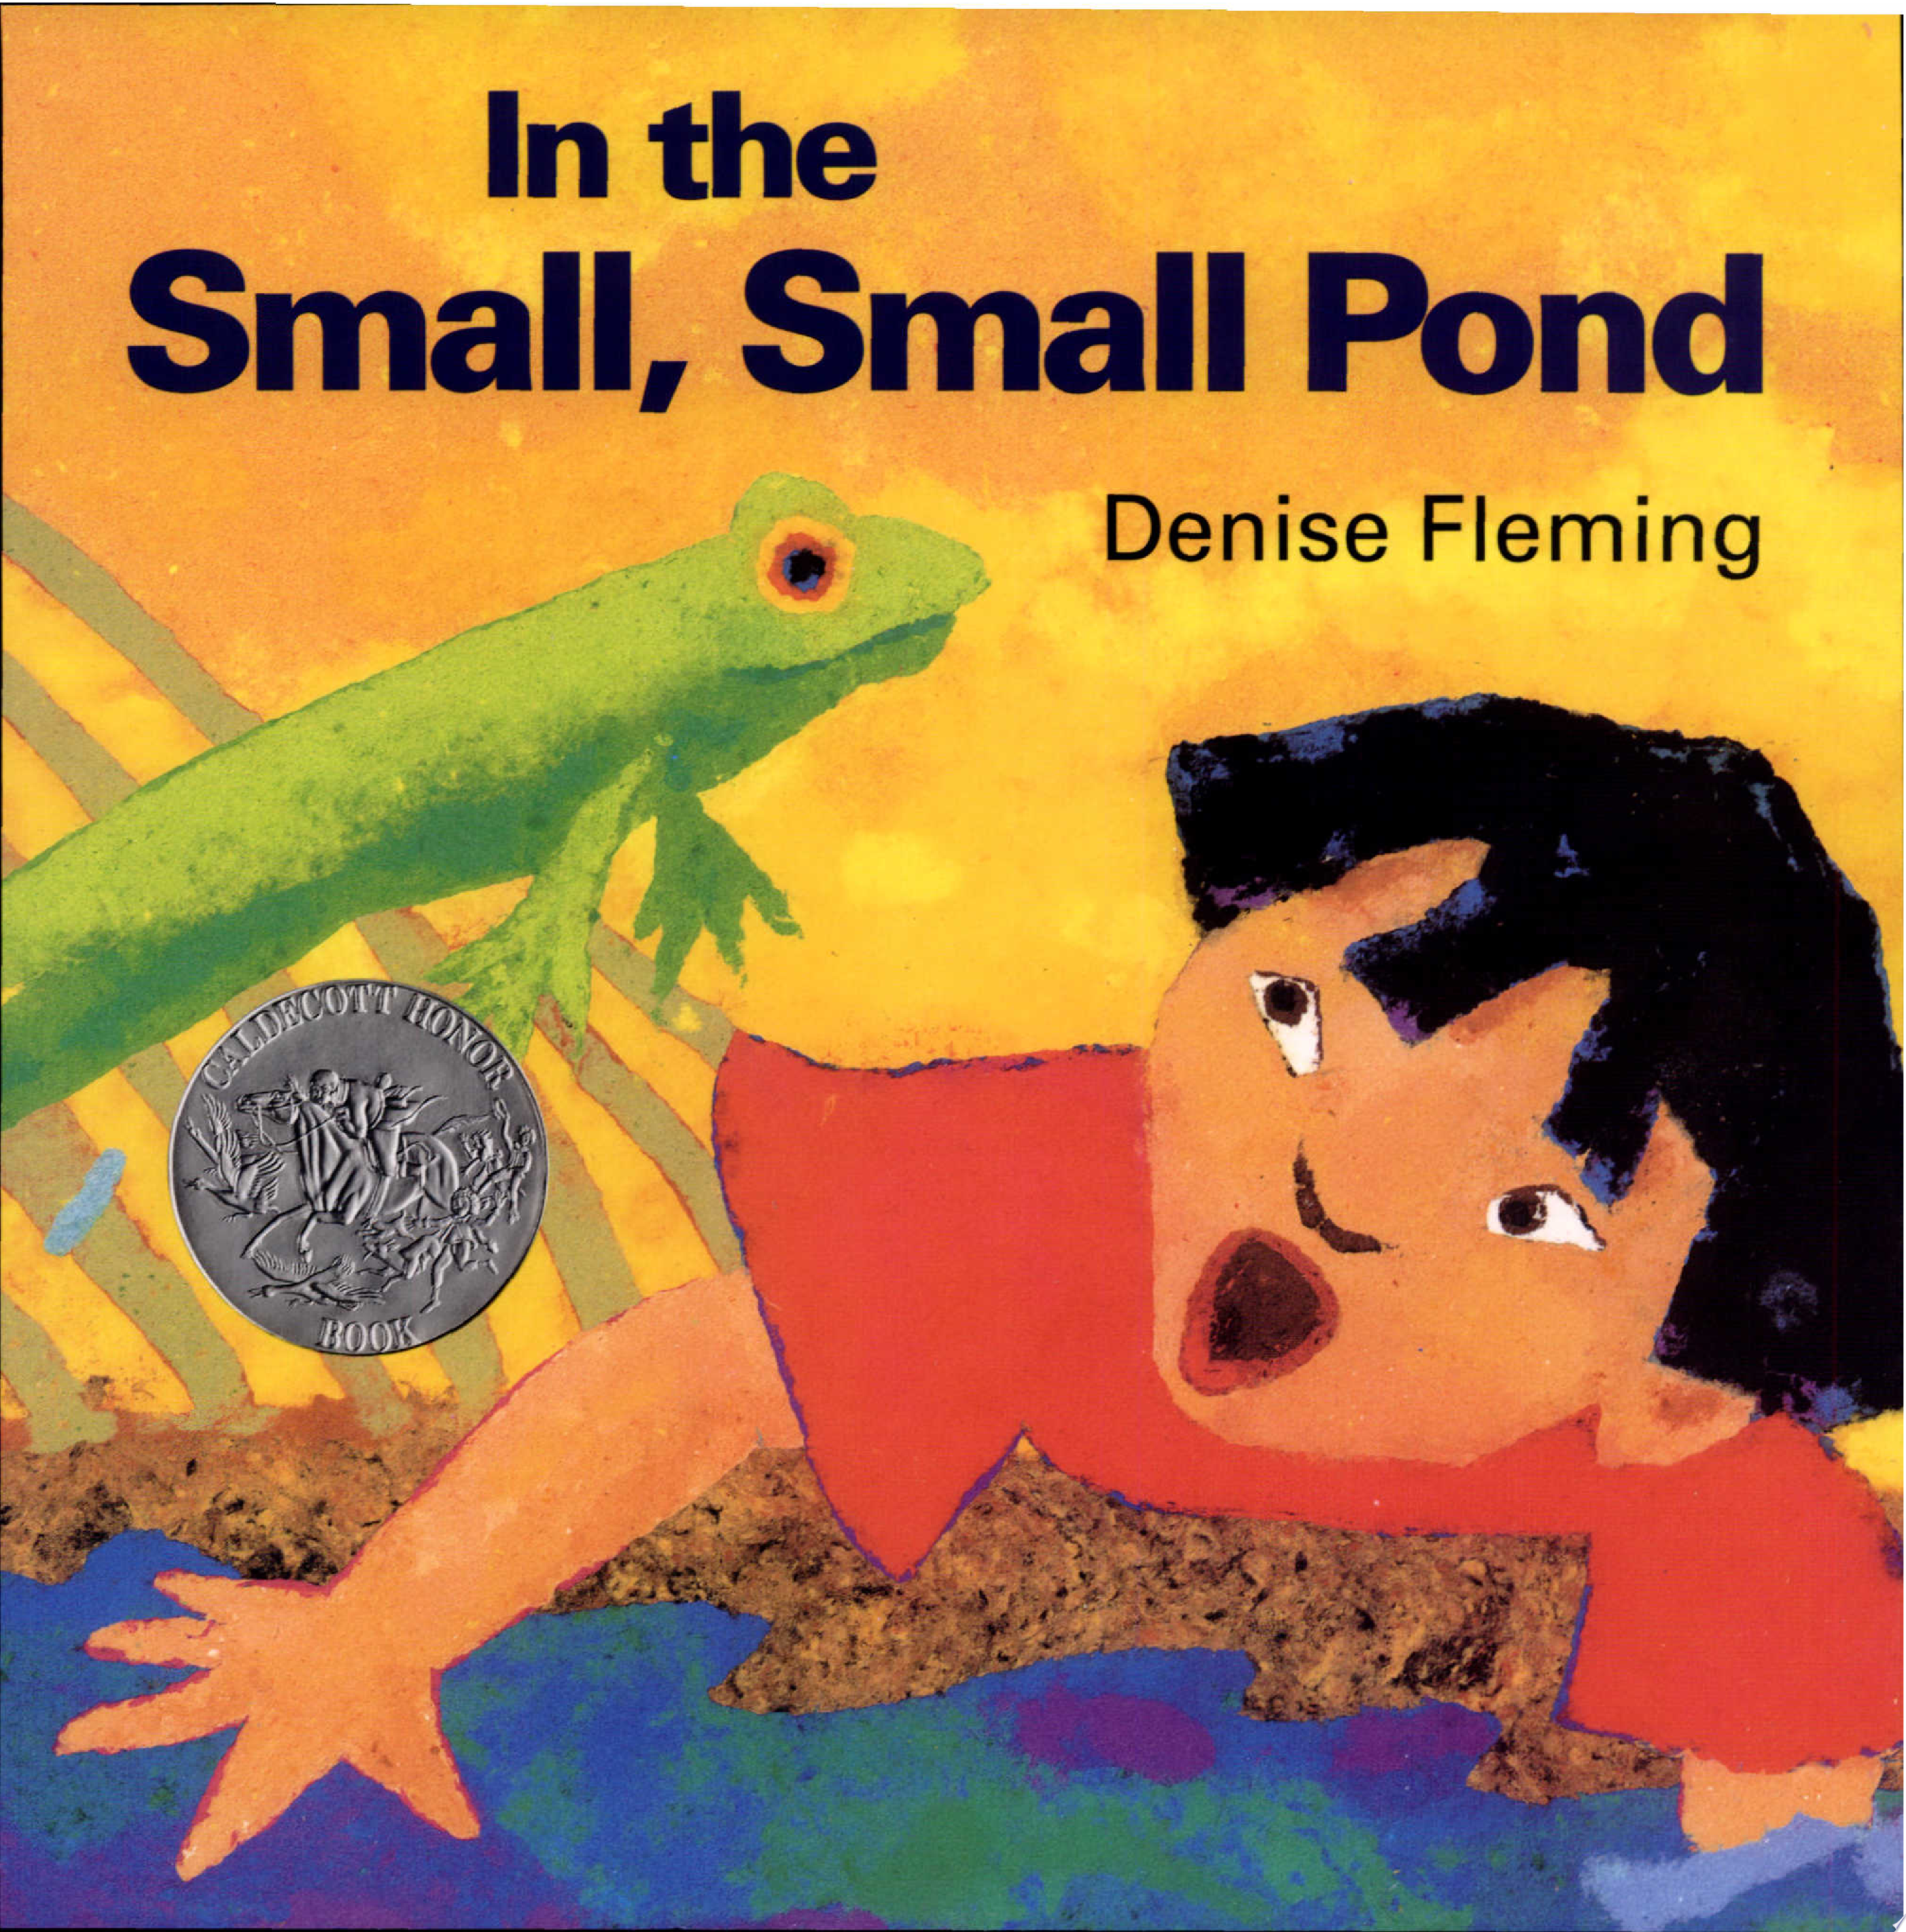 Image for "In the Small, Small Pond"